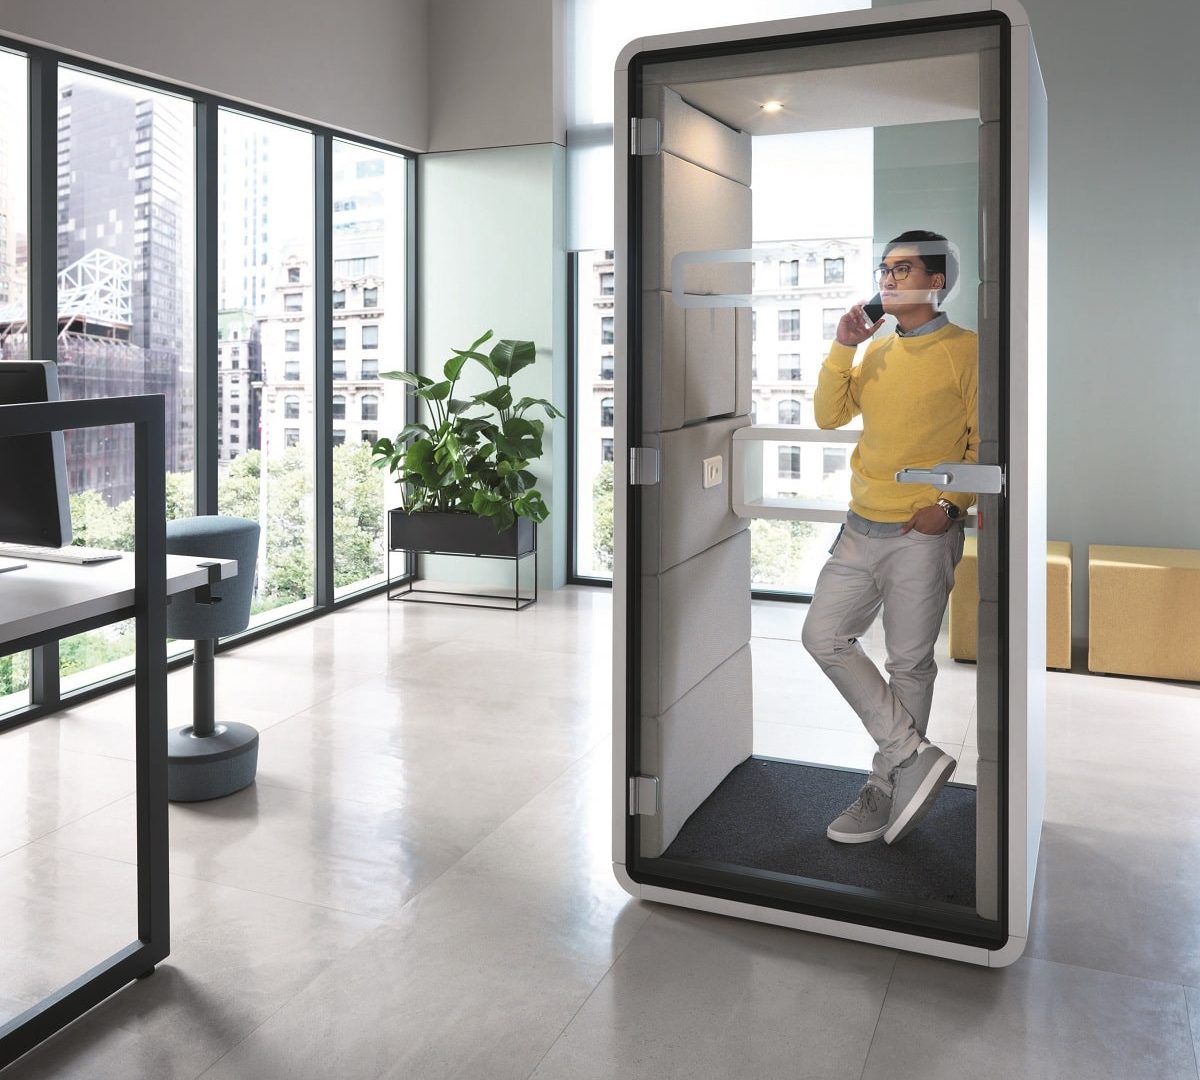 Acoustic fabric, thick laminated glass, gaskets, wool, foam, and other interior materials all safeguard Hush's target 40dB hum. Pictured here is the hushPhone call booth, carefully designed for calls on open floors.